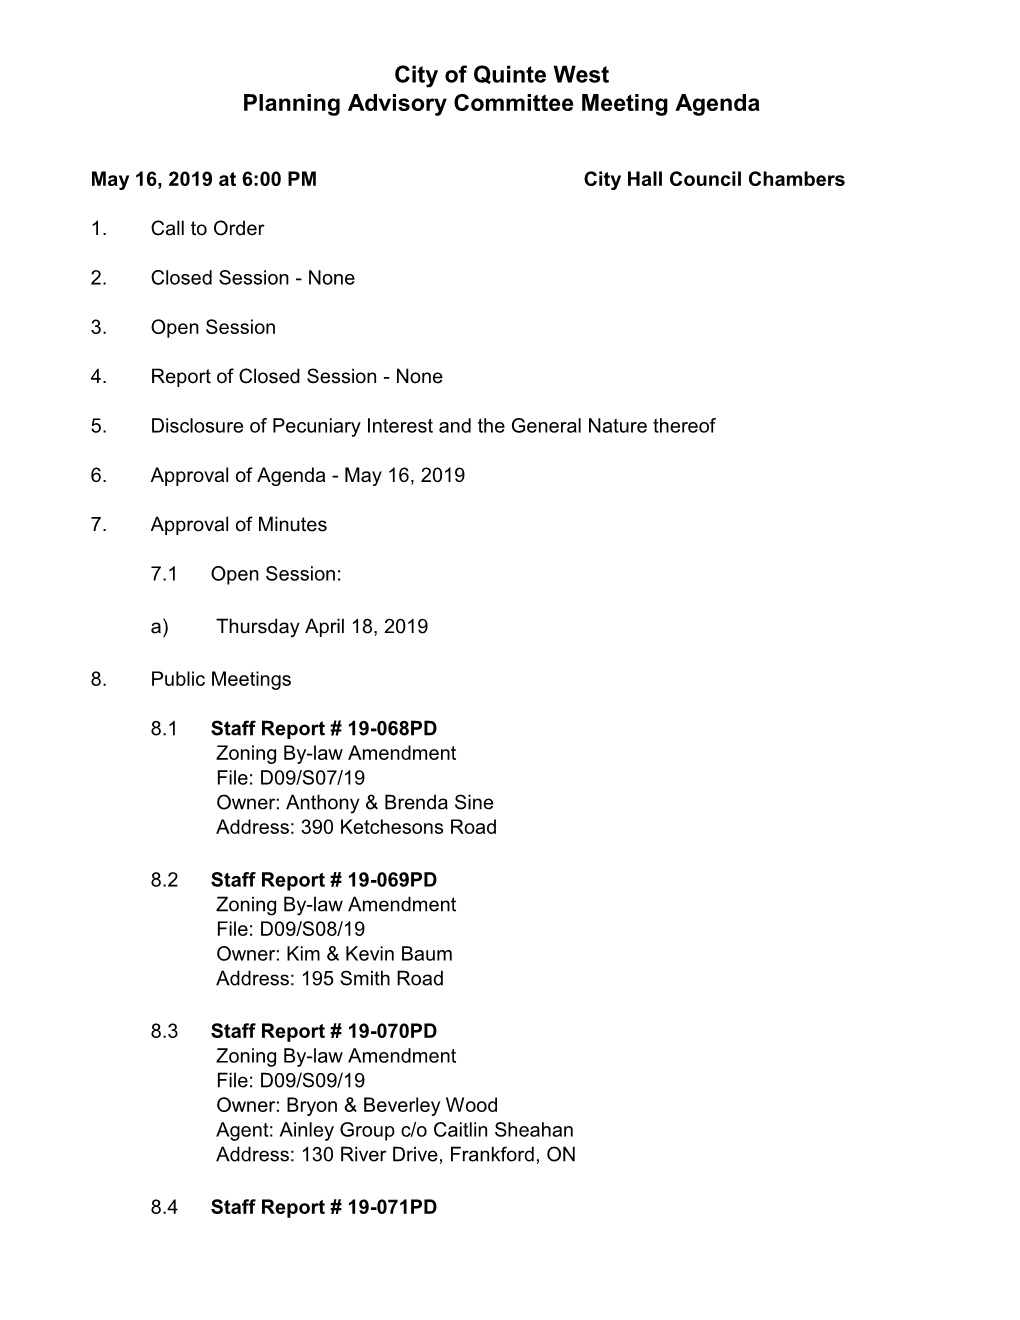 City of Quinte West Planning Advisory Committee Meeting Agenda